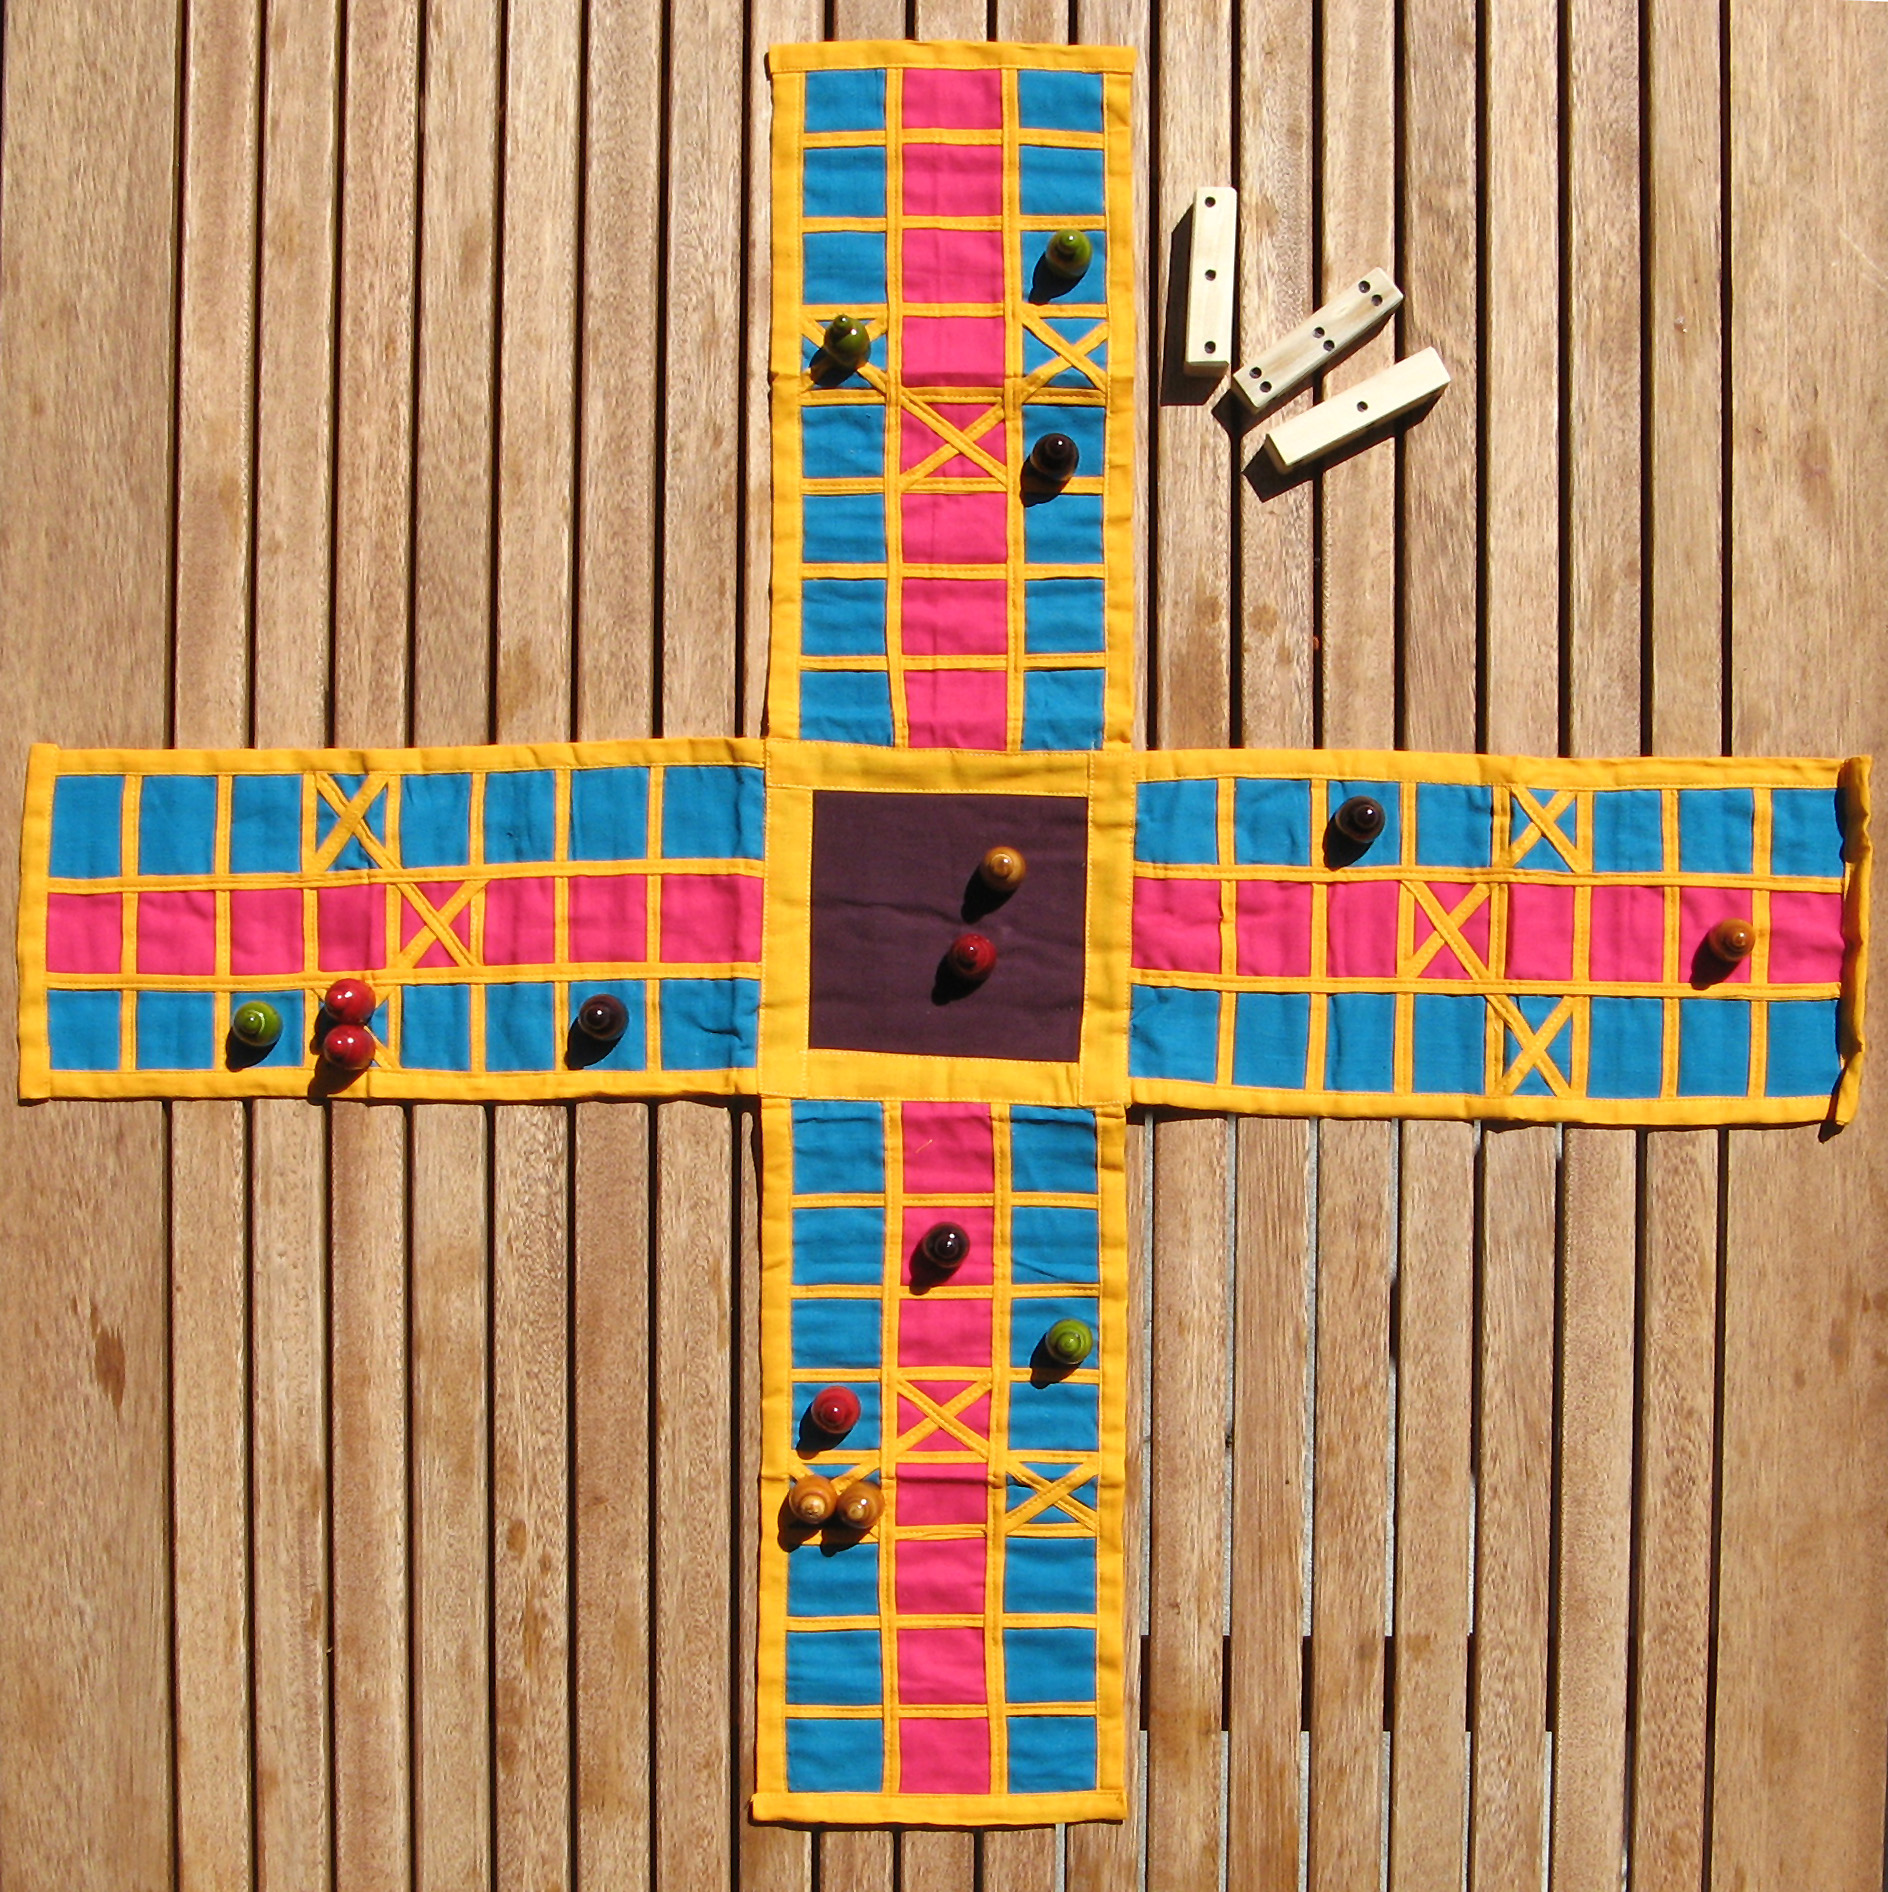 the rule ludo game